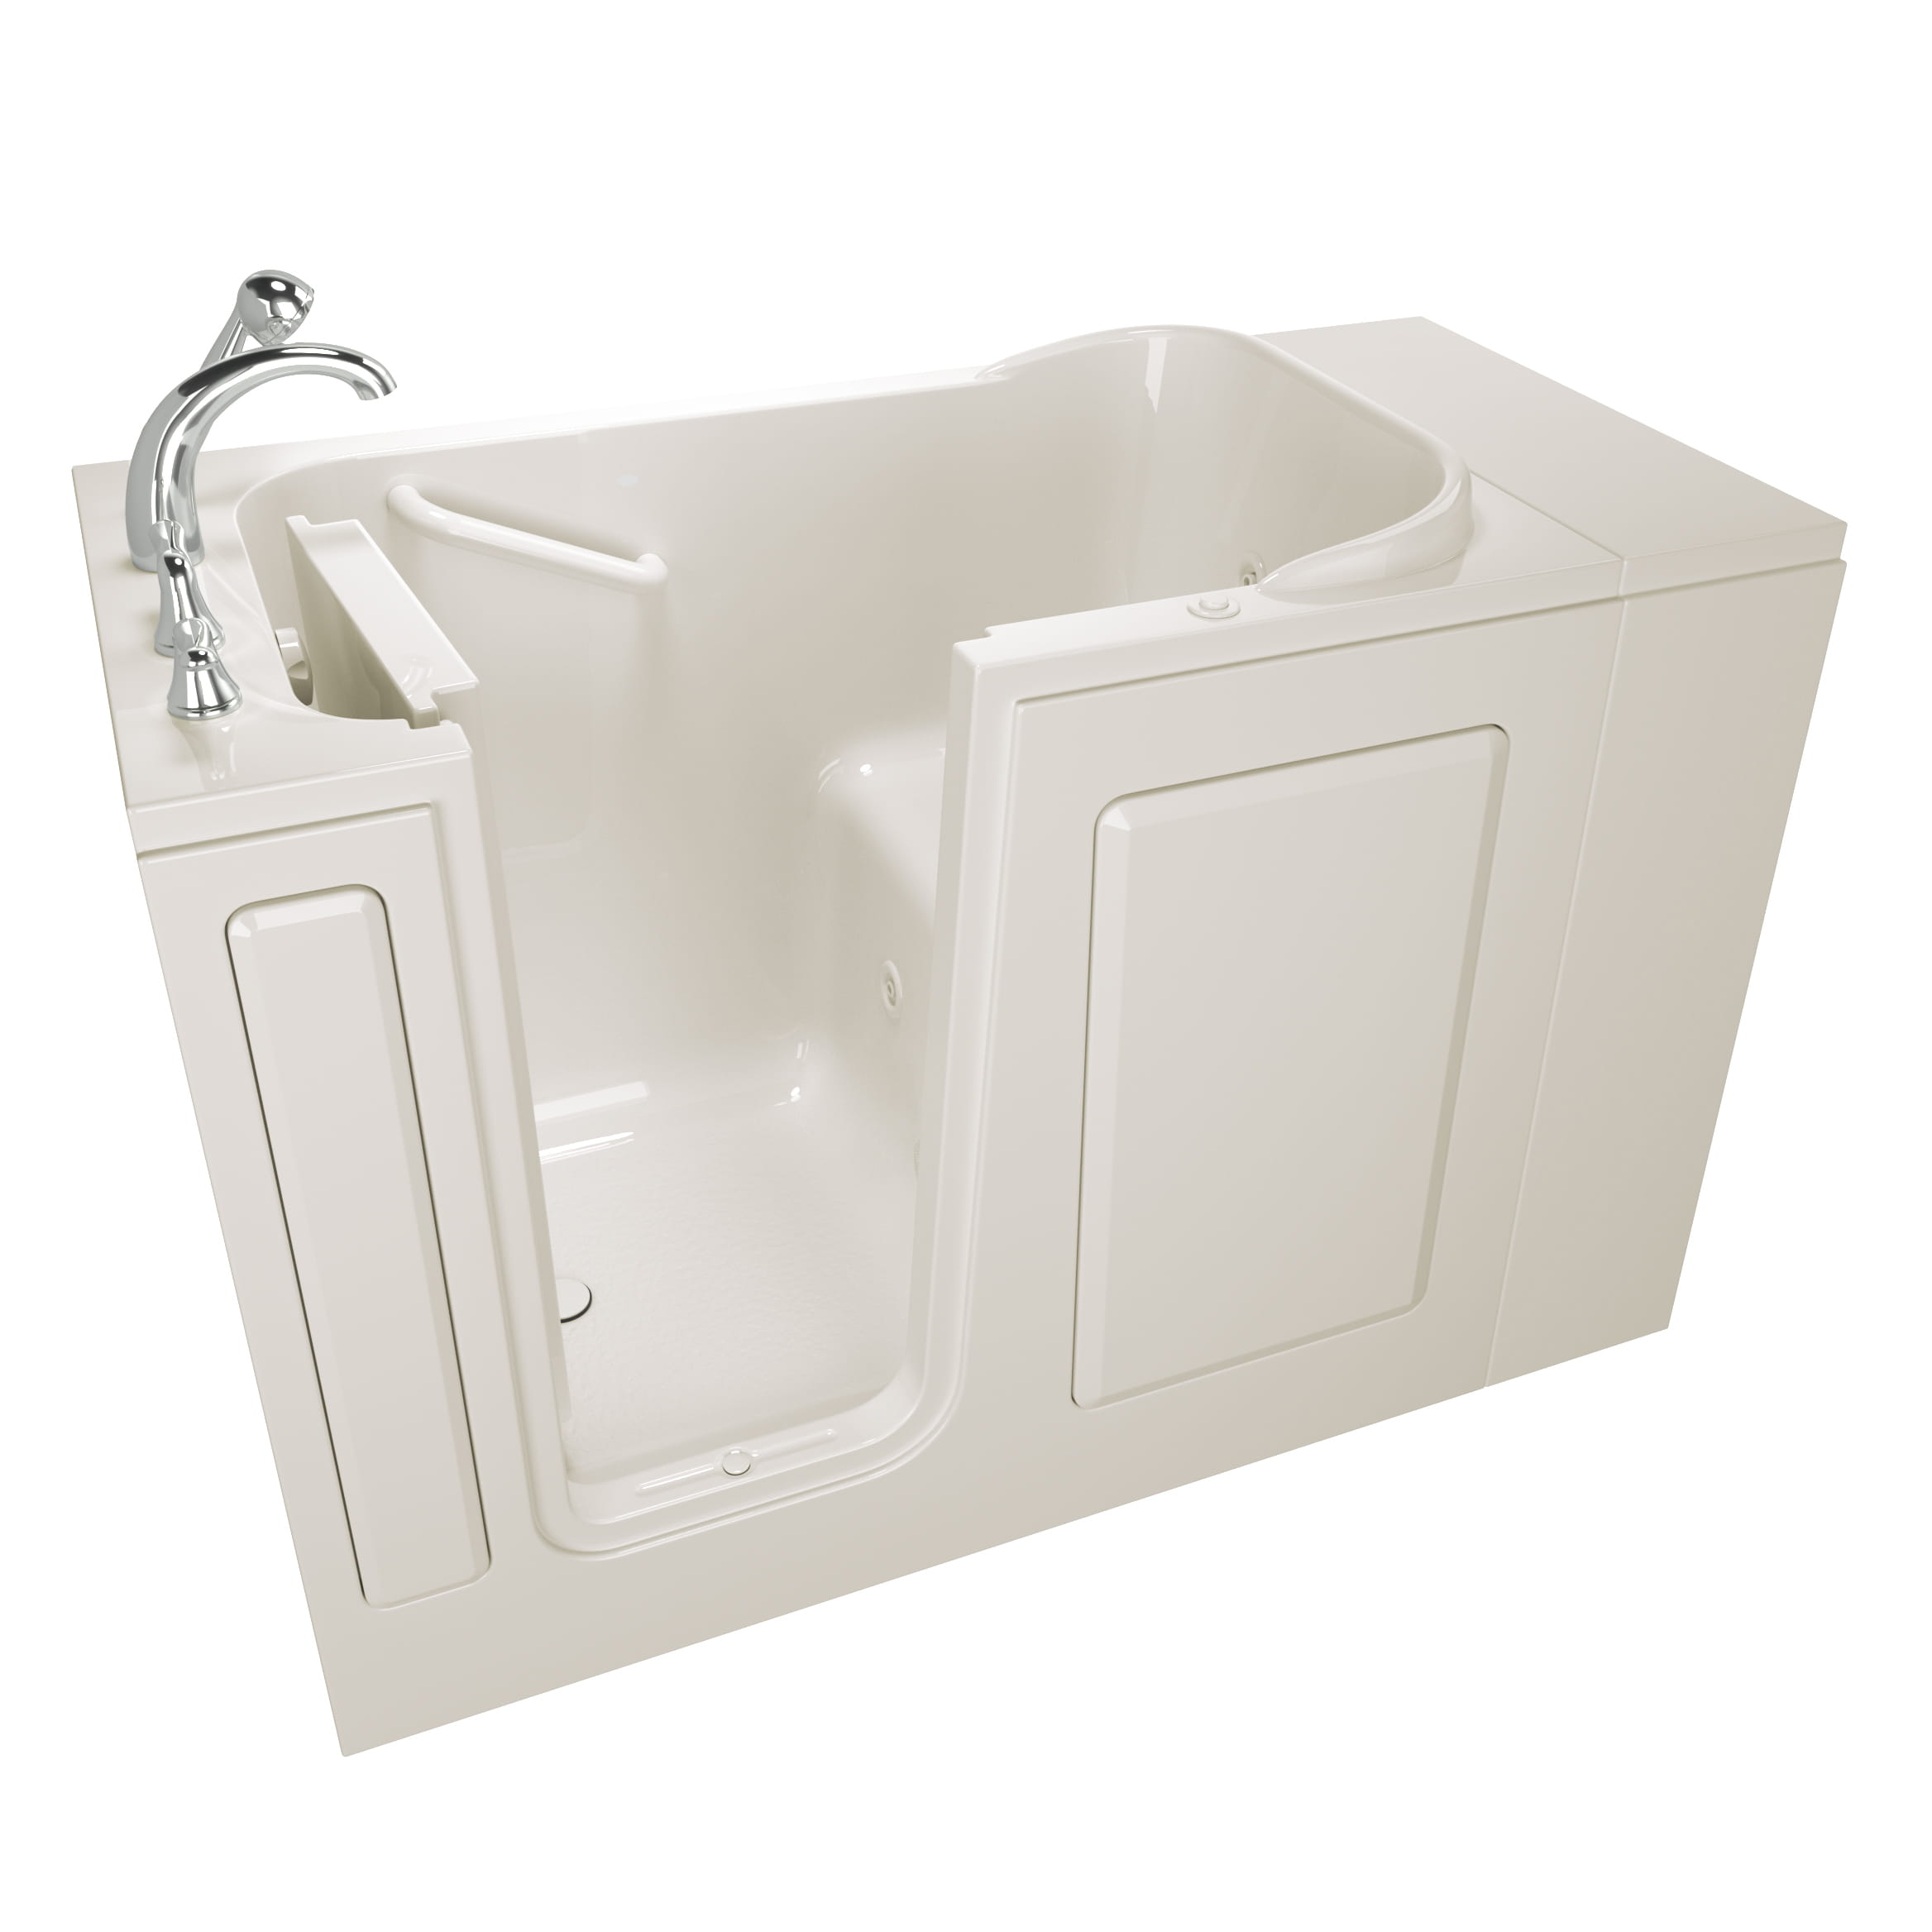 Gelcoat Entry Series 48 x 28 Inch Walk In Tub With Whirlpool System - Left Hand Drain With Faucet ST BISCUIT